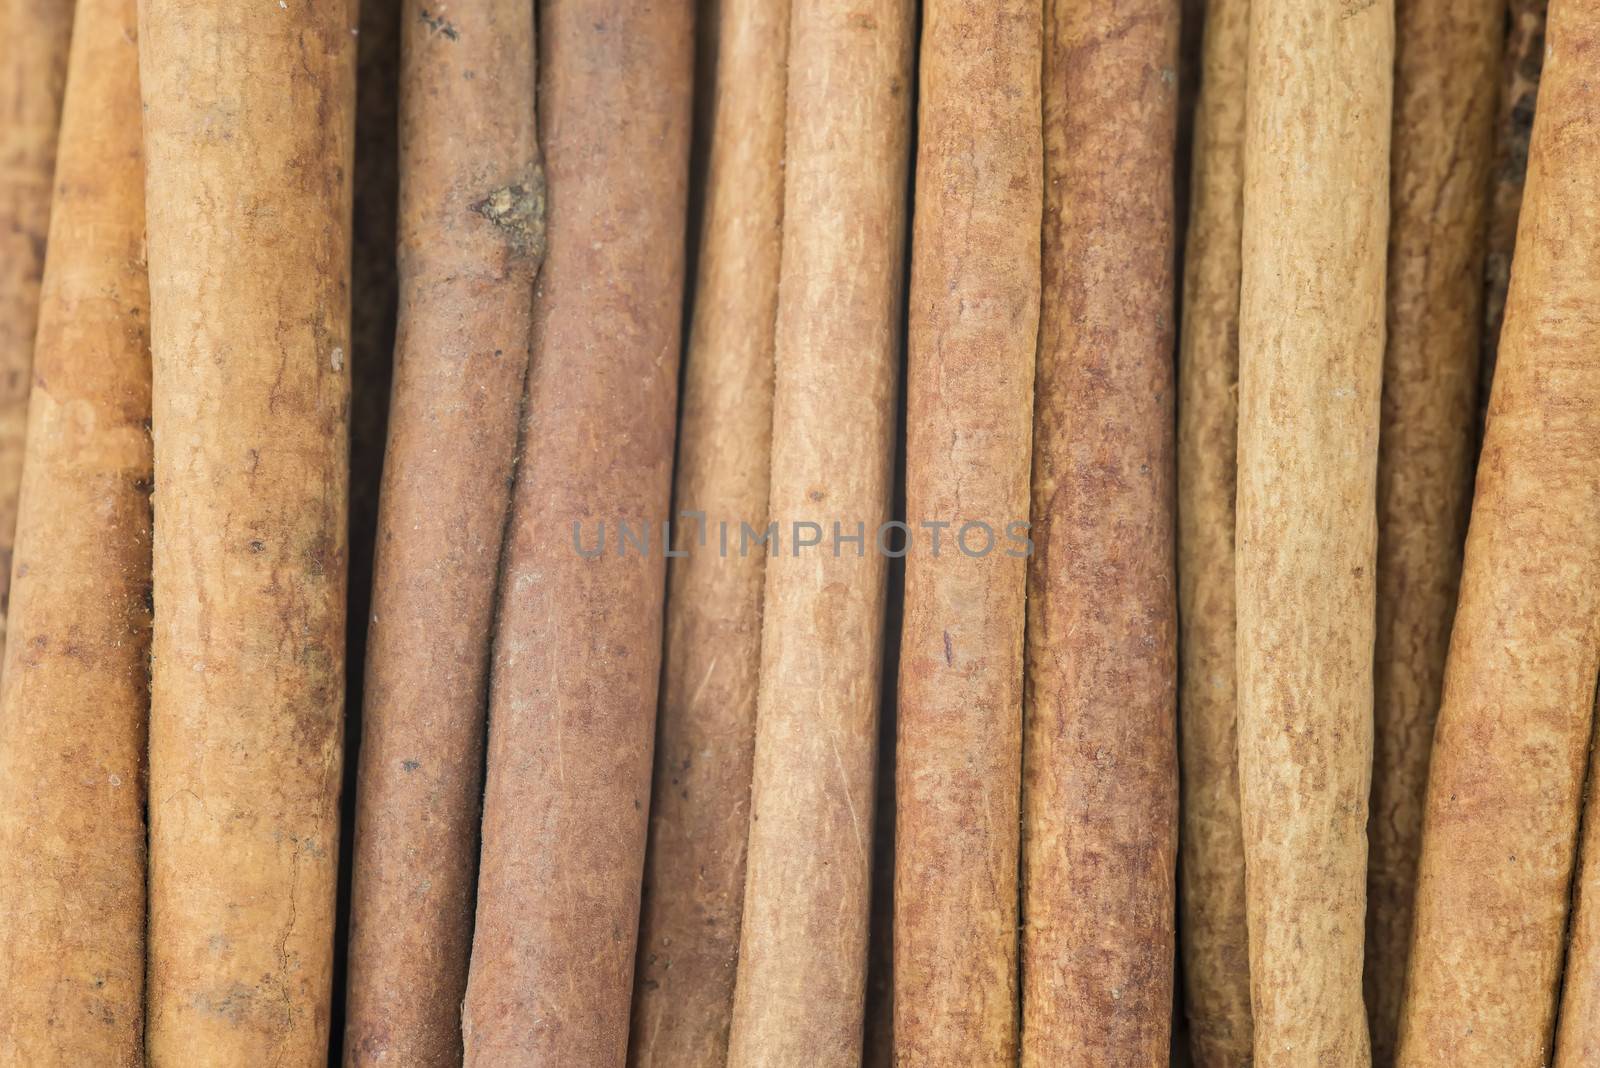 Cinnamon sticks set and star anise showing its wooden texture